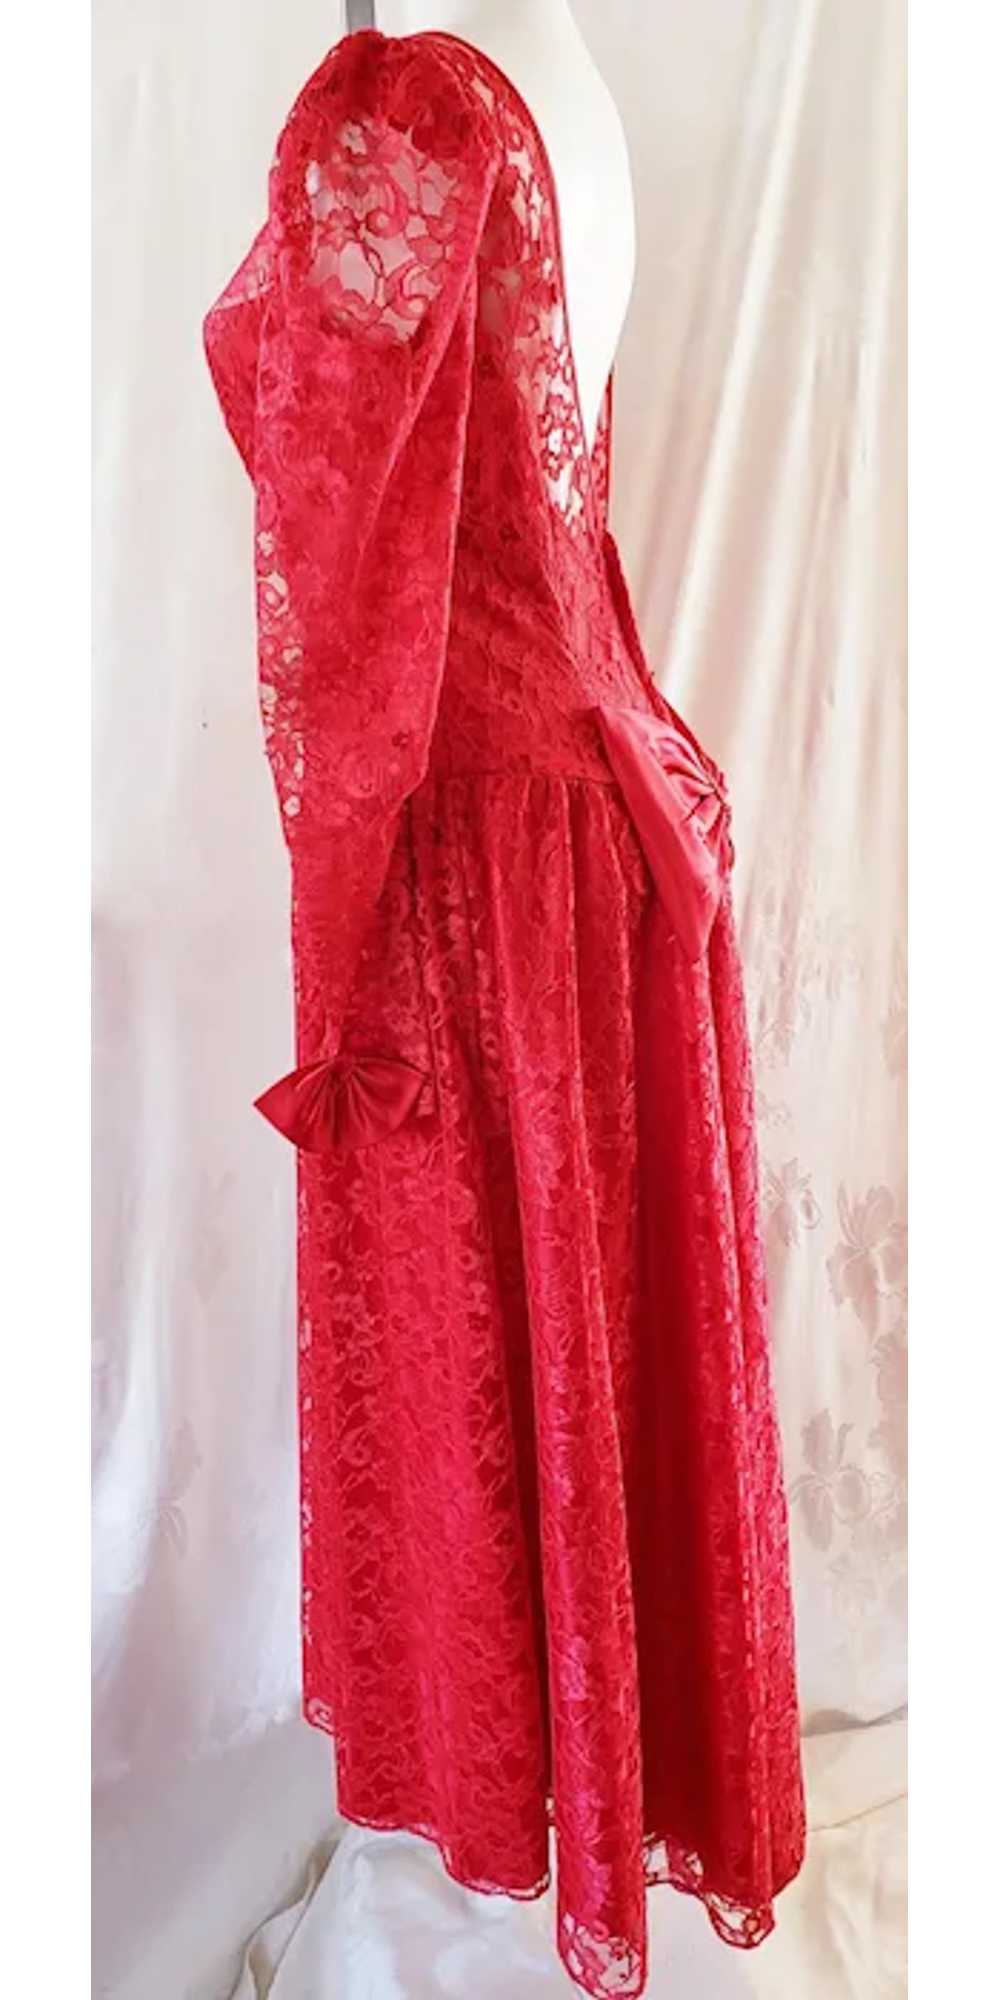 Red Lace Dreamy Gown - image 5